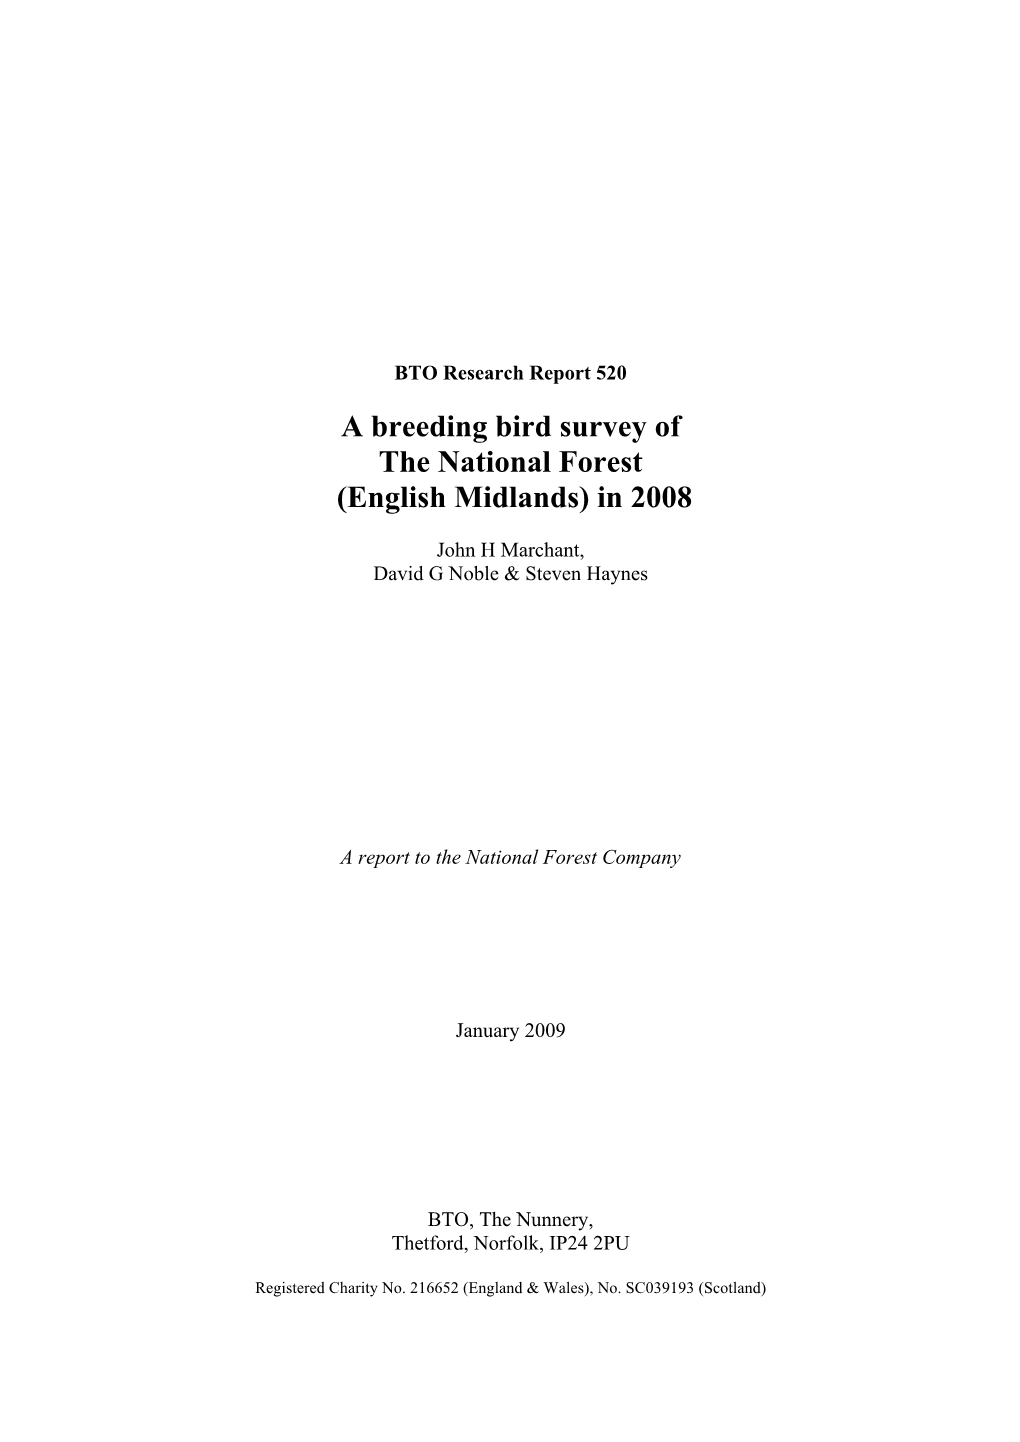 A Breeding Bird Survey of the National Forest (English Midlands) in 2008